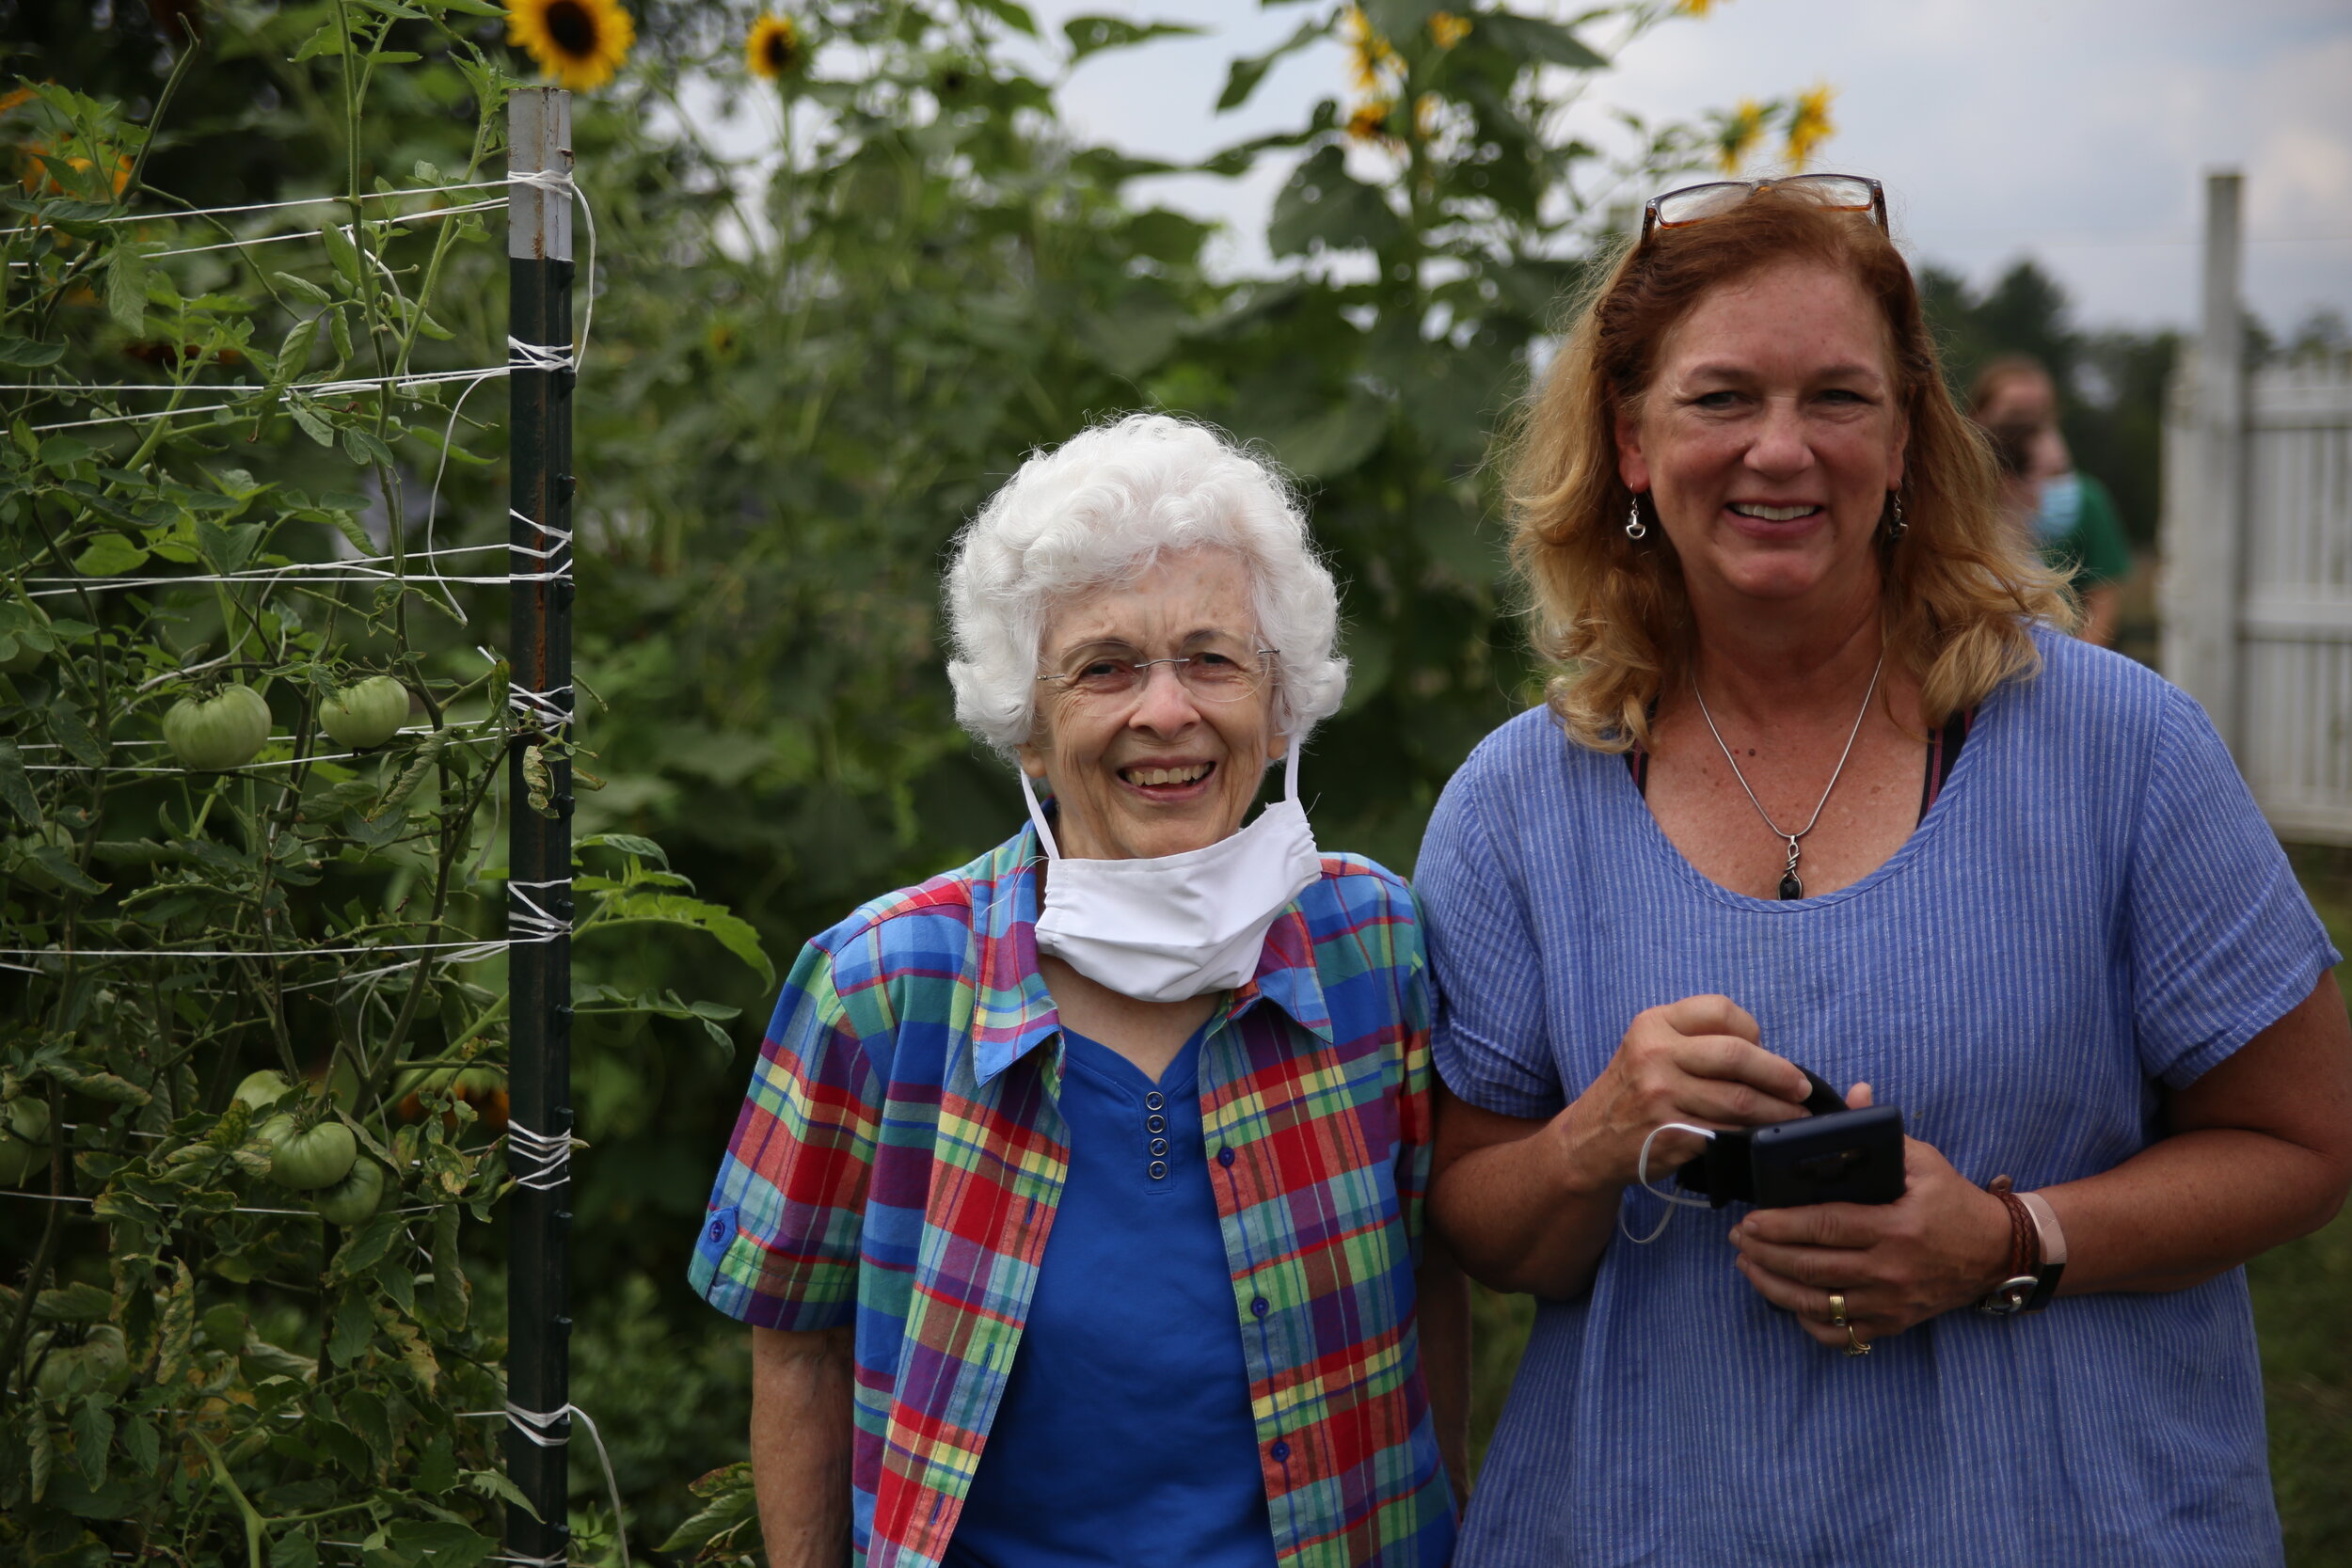  Kathryn Gemmer and her mother, Kathleen (left) visited the BCCF in August to see the crops grown from the seeds they have shared with the farm.  